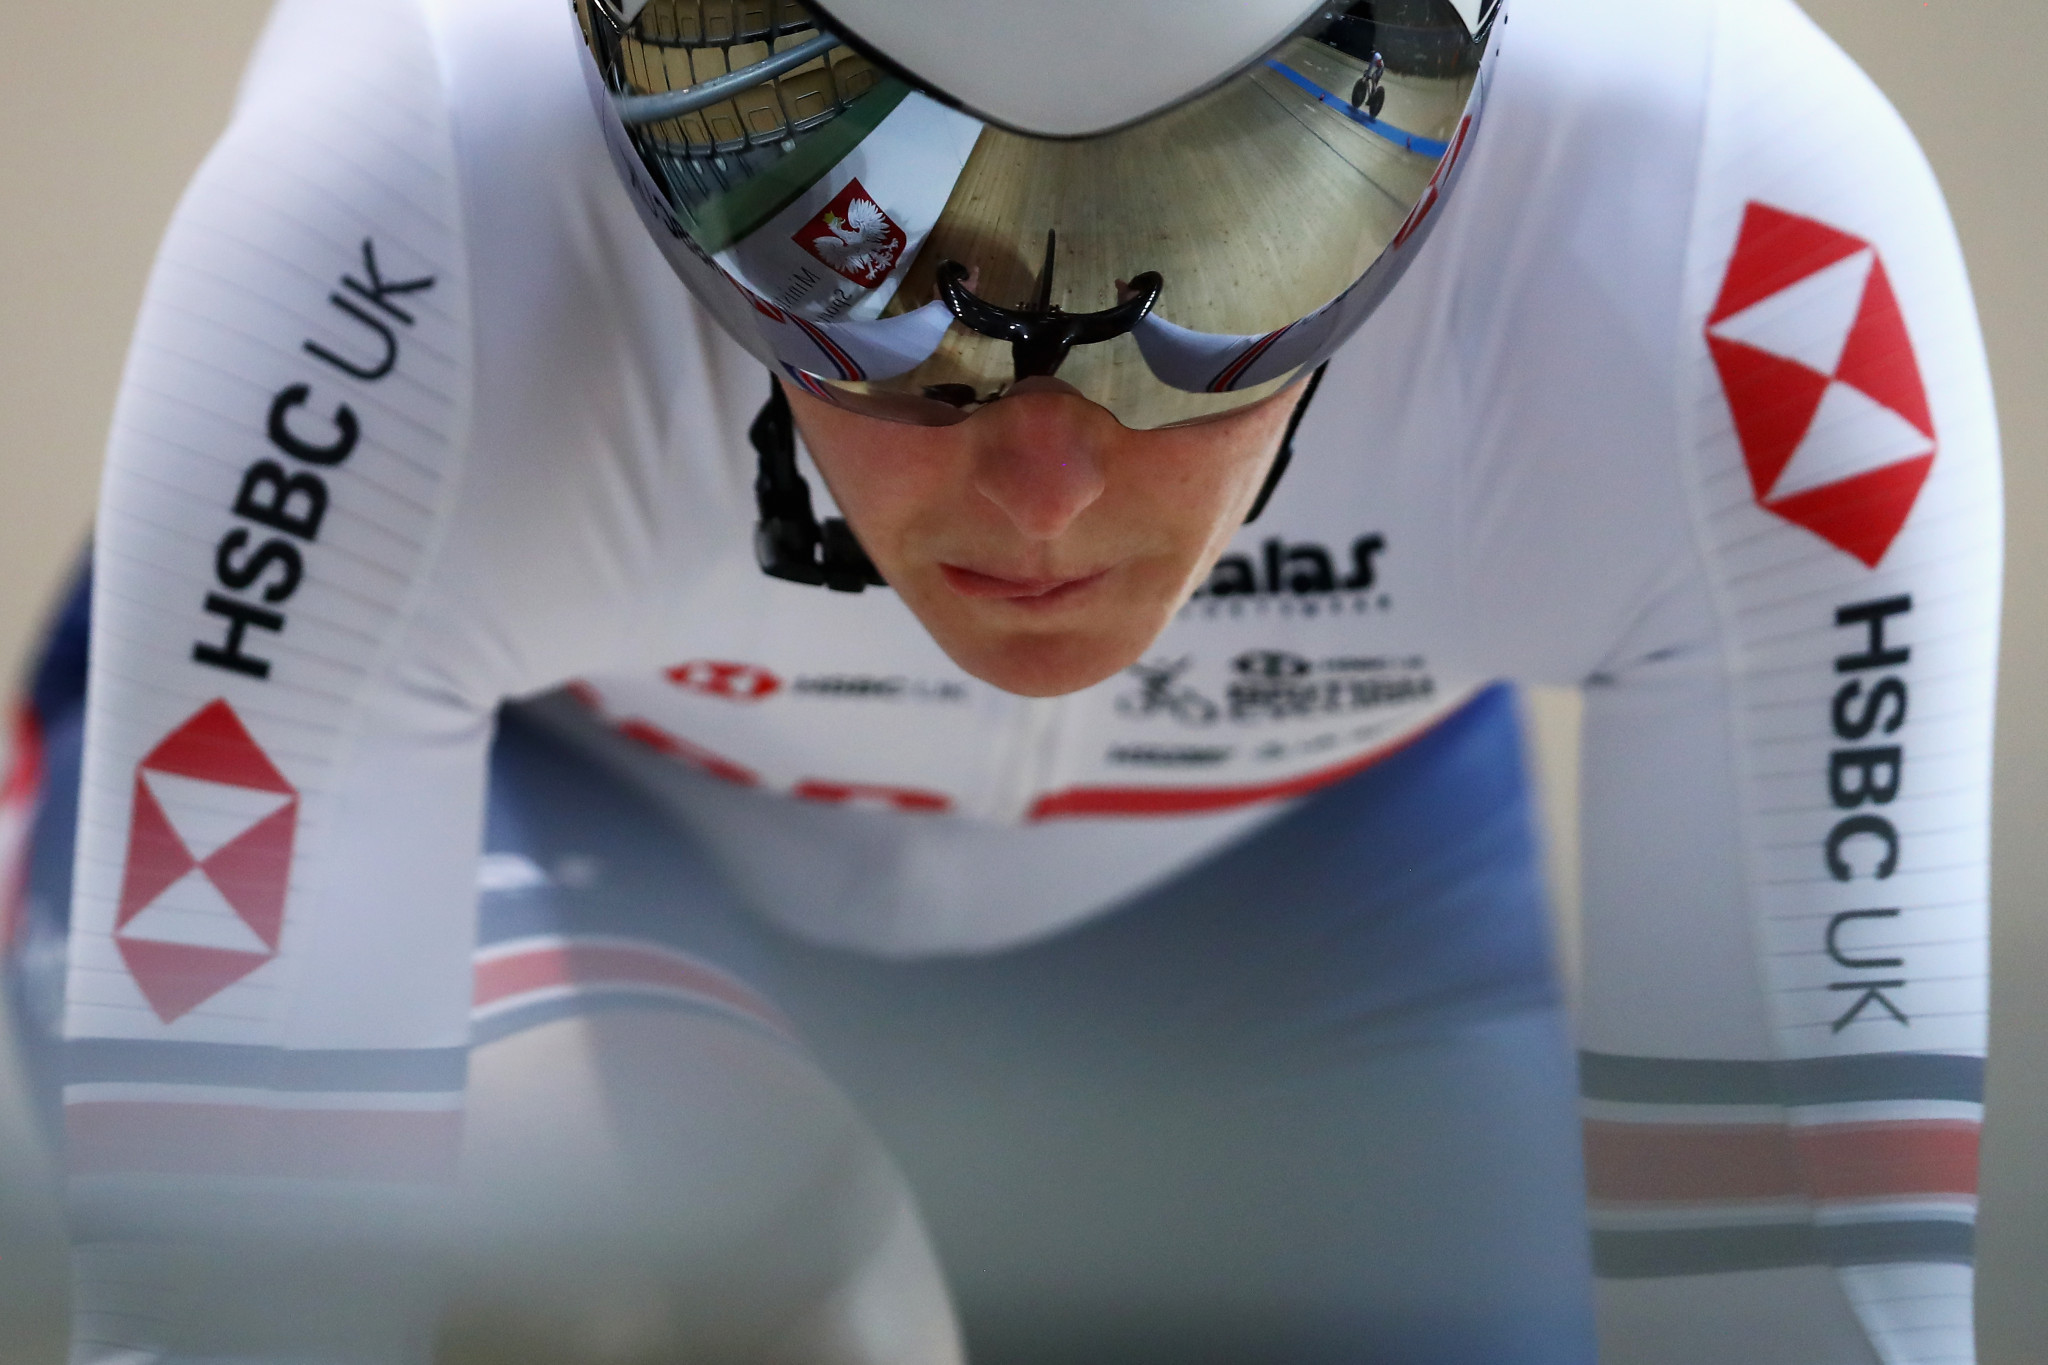 Marchant clinches keirin gold at UCI Track World Cup in Glasgow